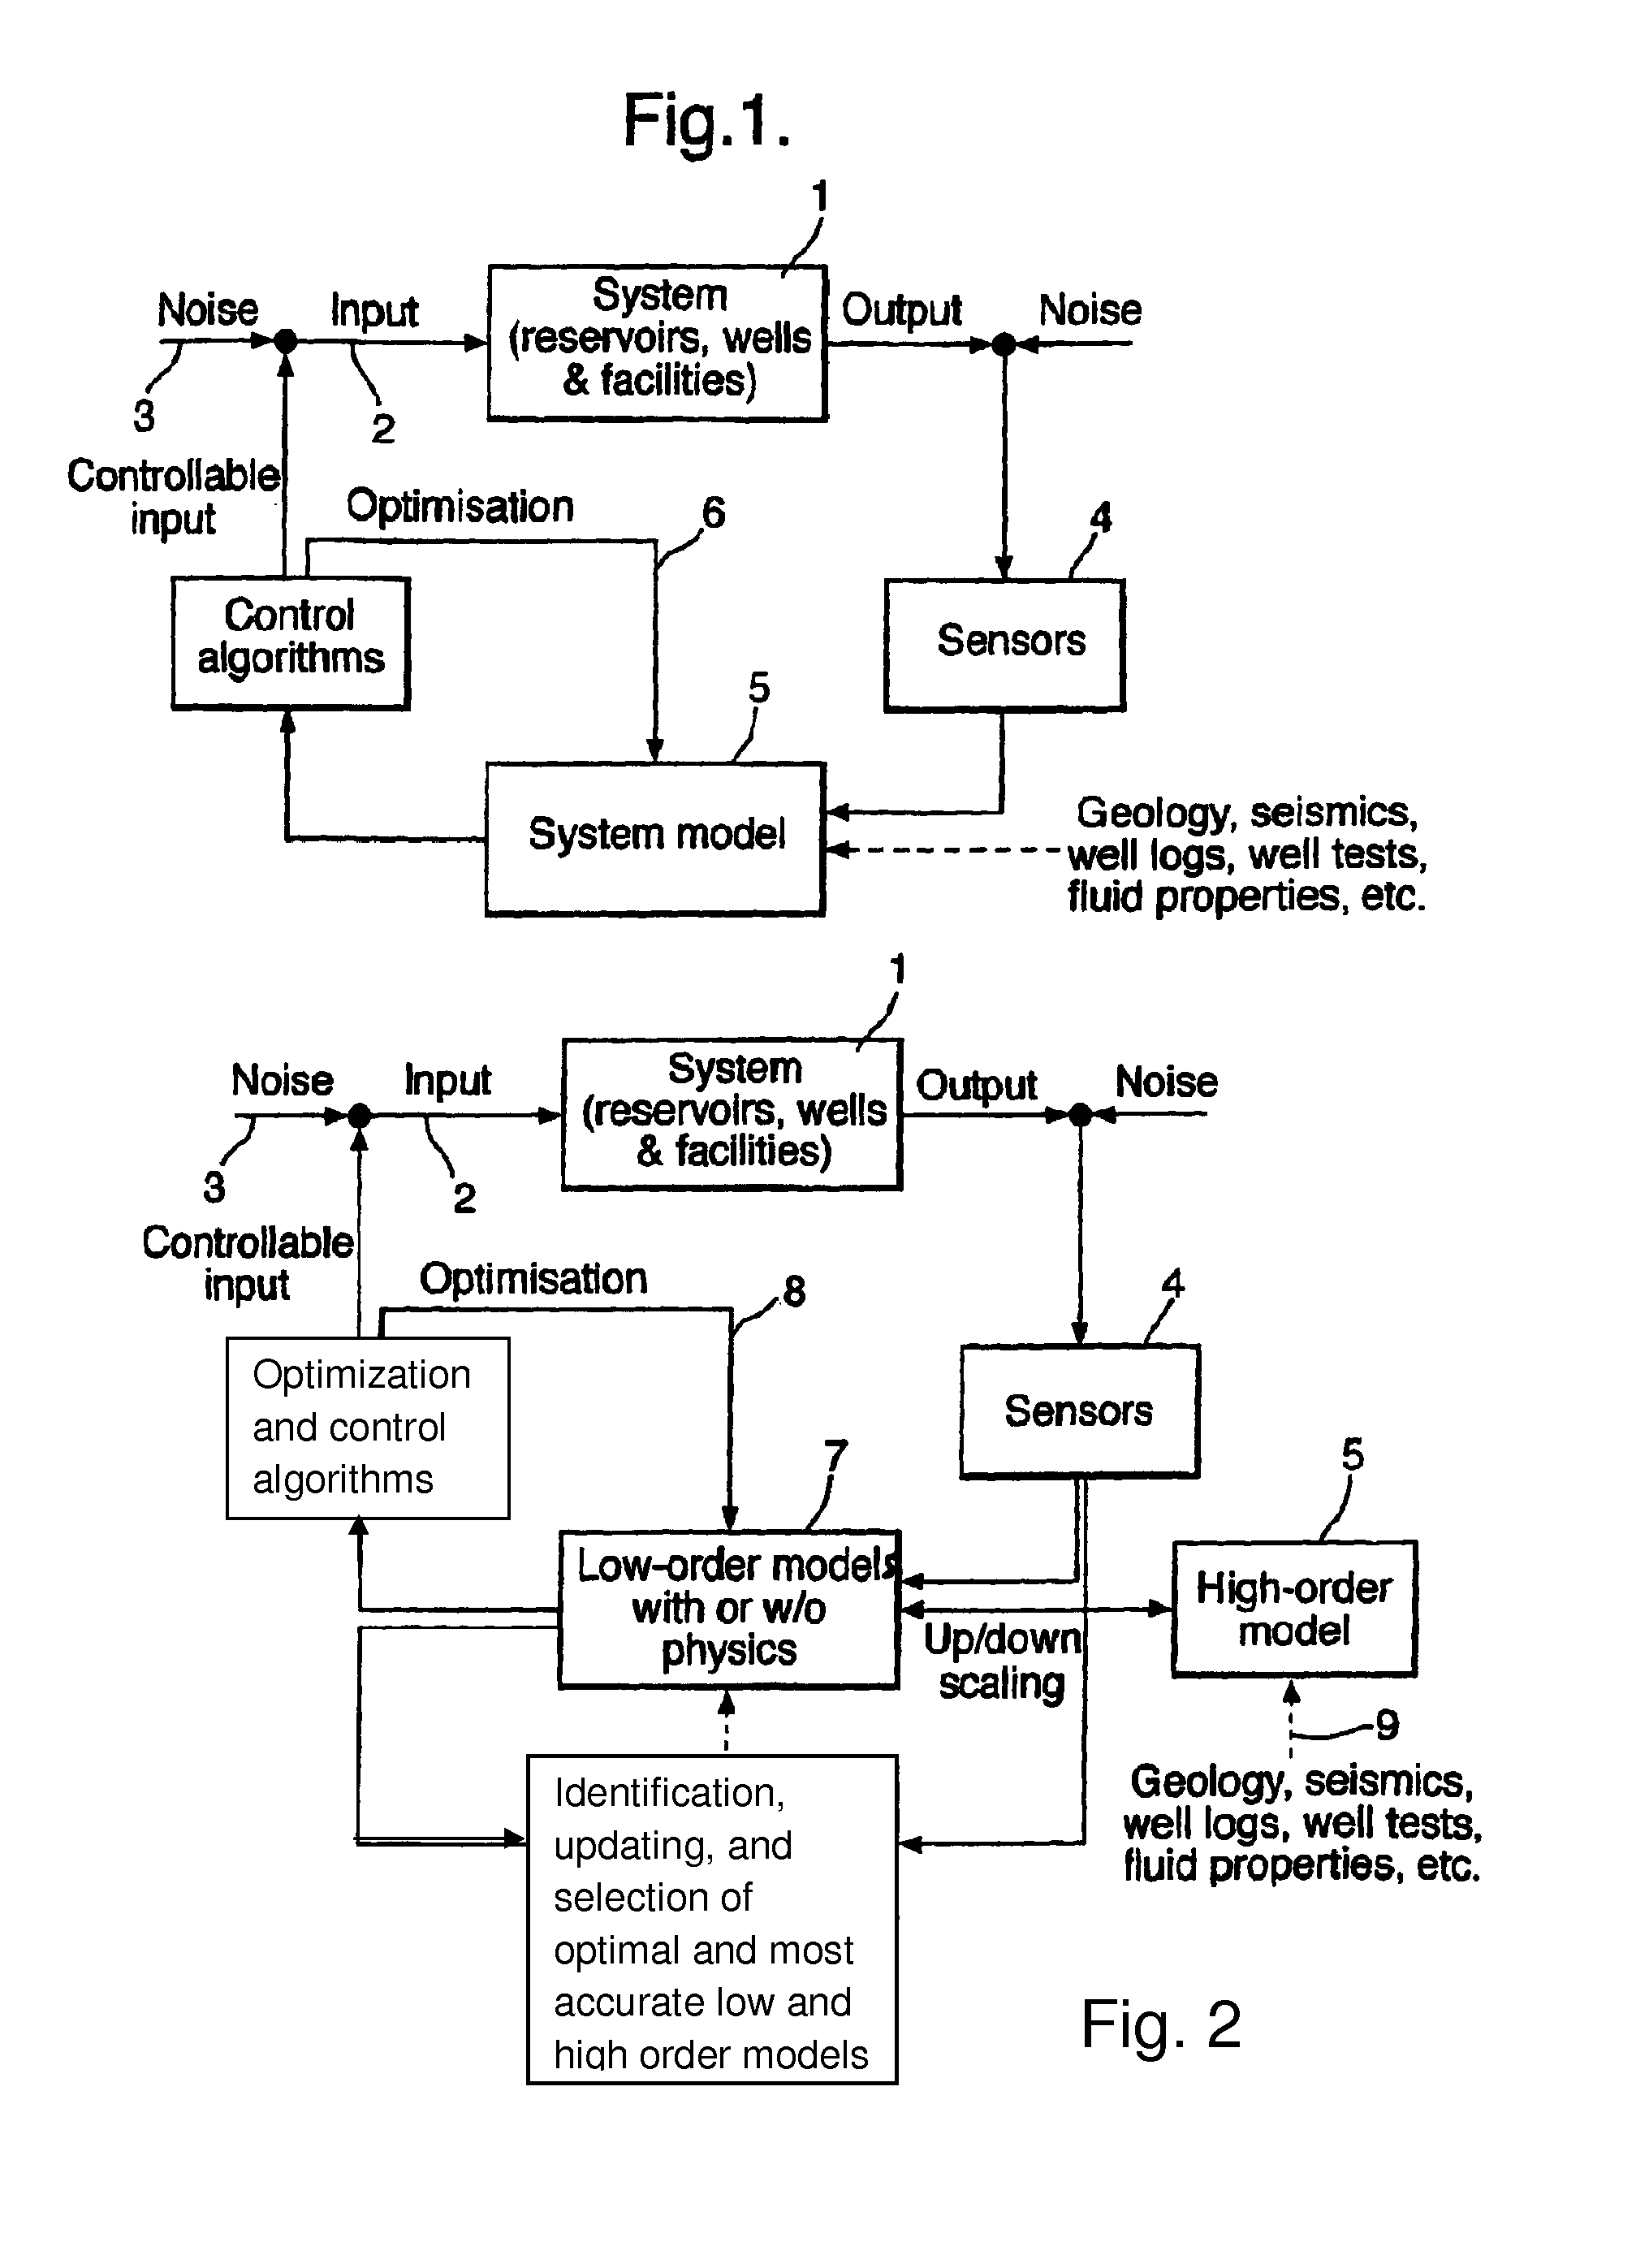 Closed loop control system for controlling production of hydrocarbon fluid from an underground formation